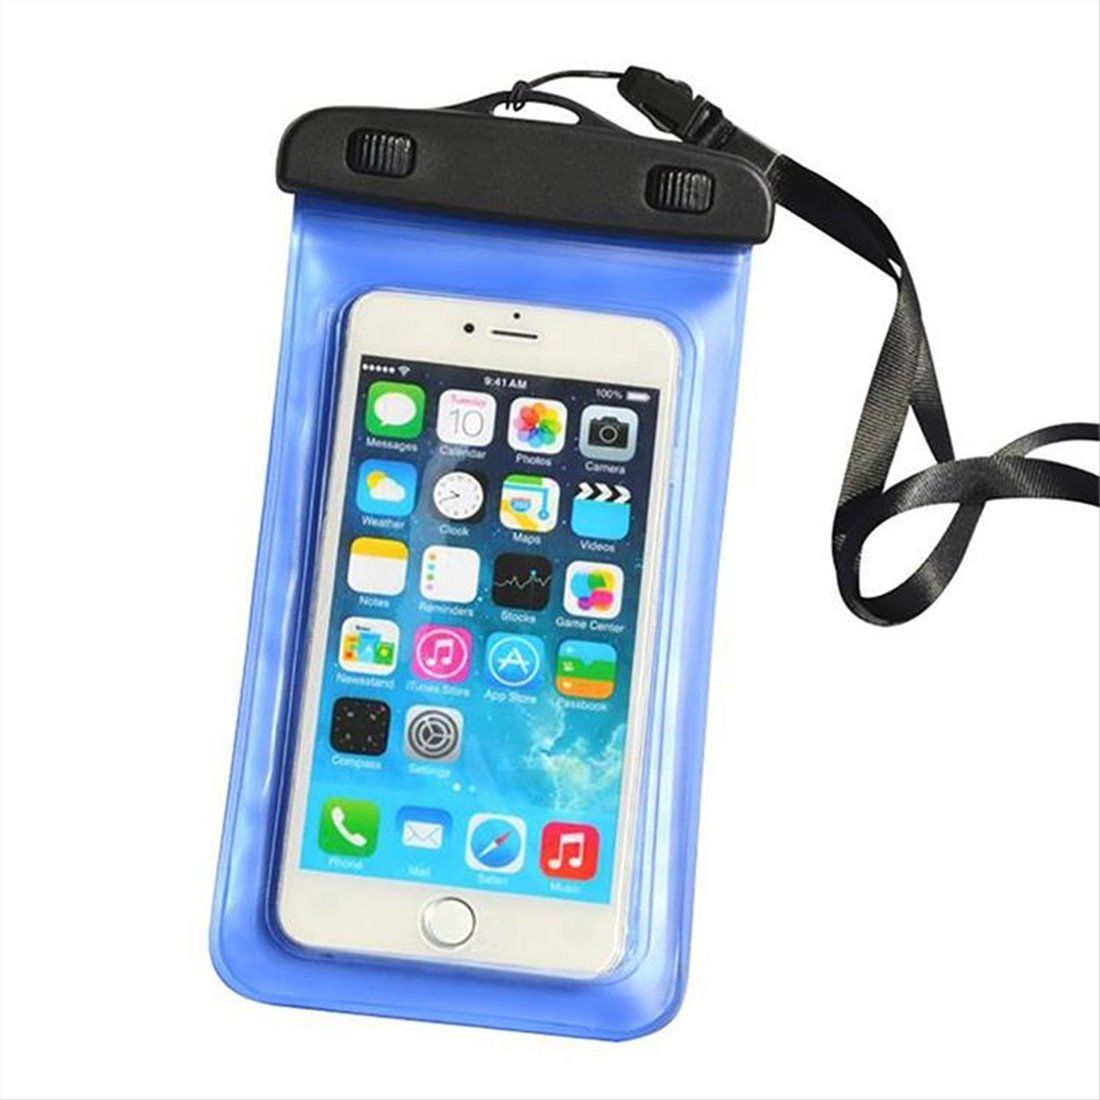 Universal Waterproof phone case for mobile phone with Tranparent front with packing-  Blue